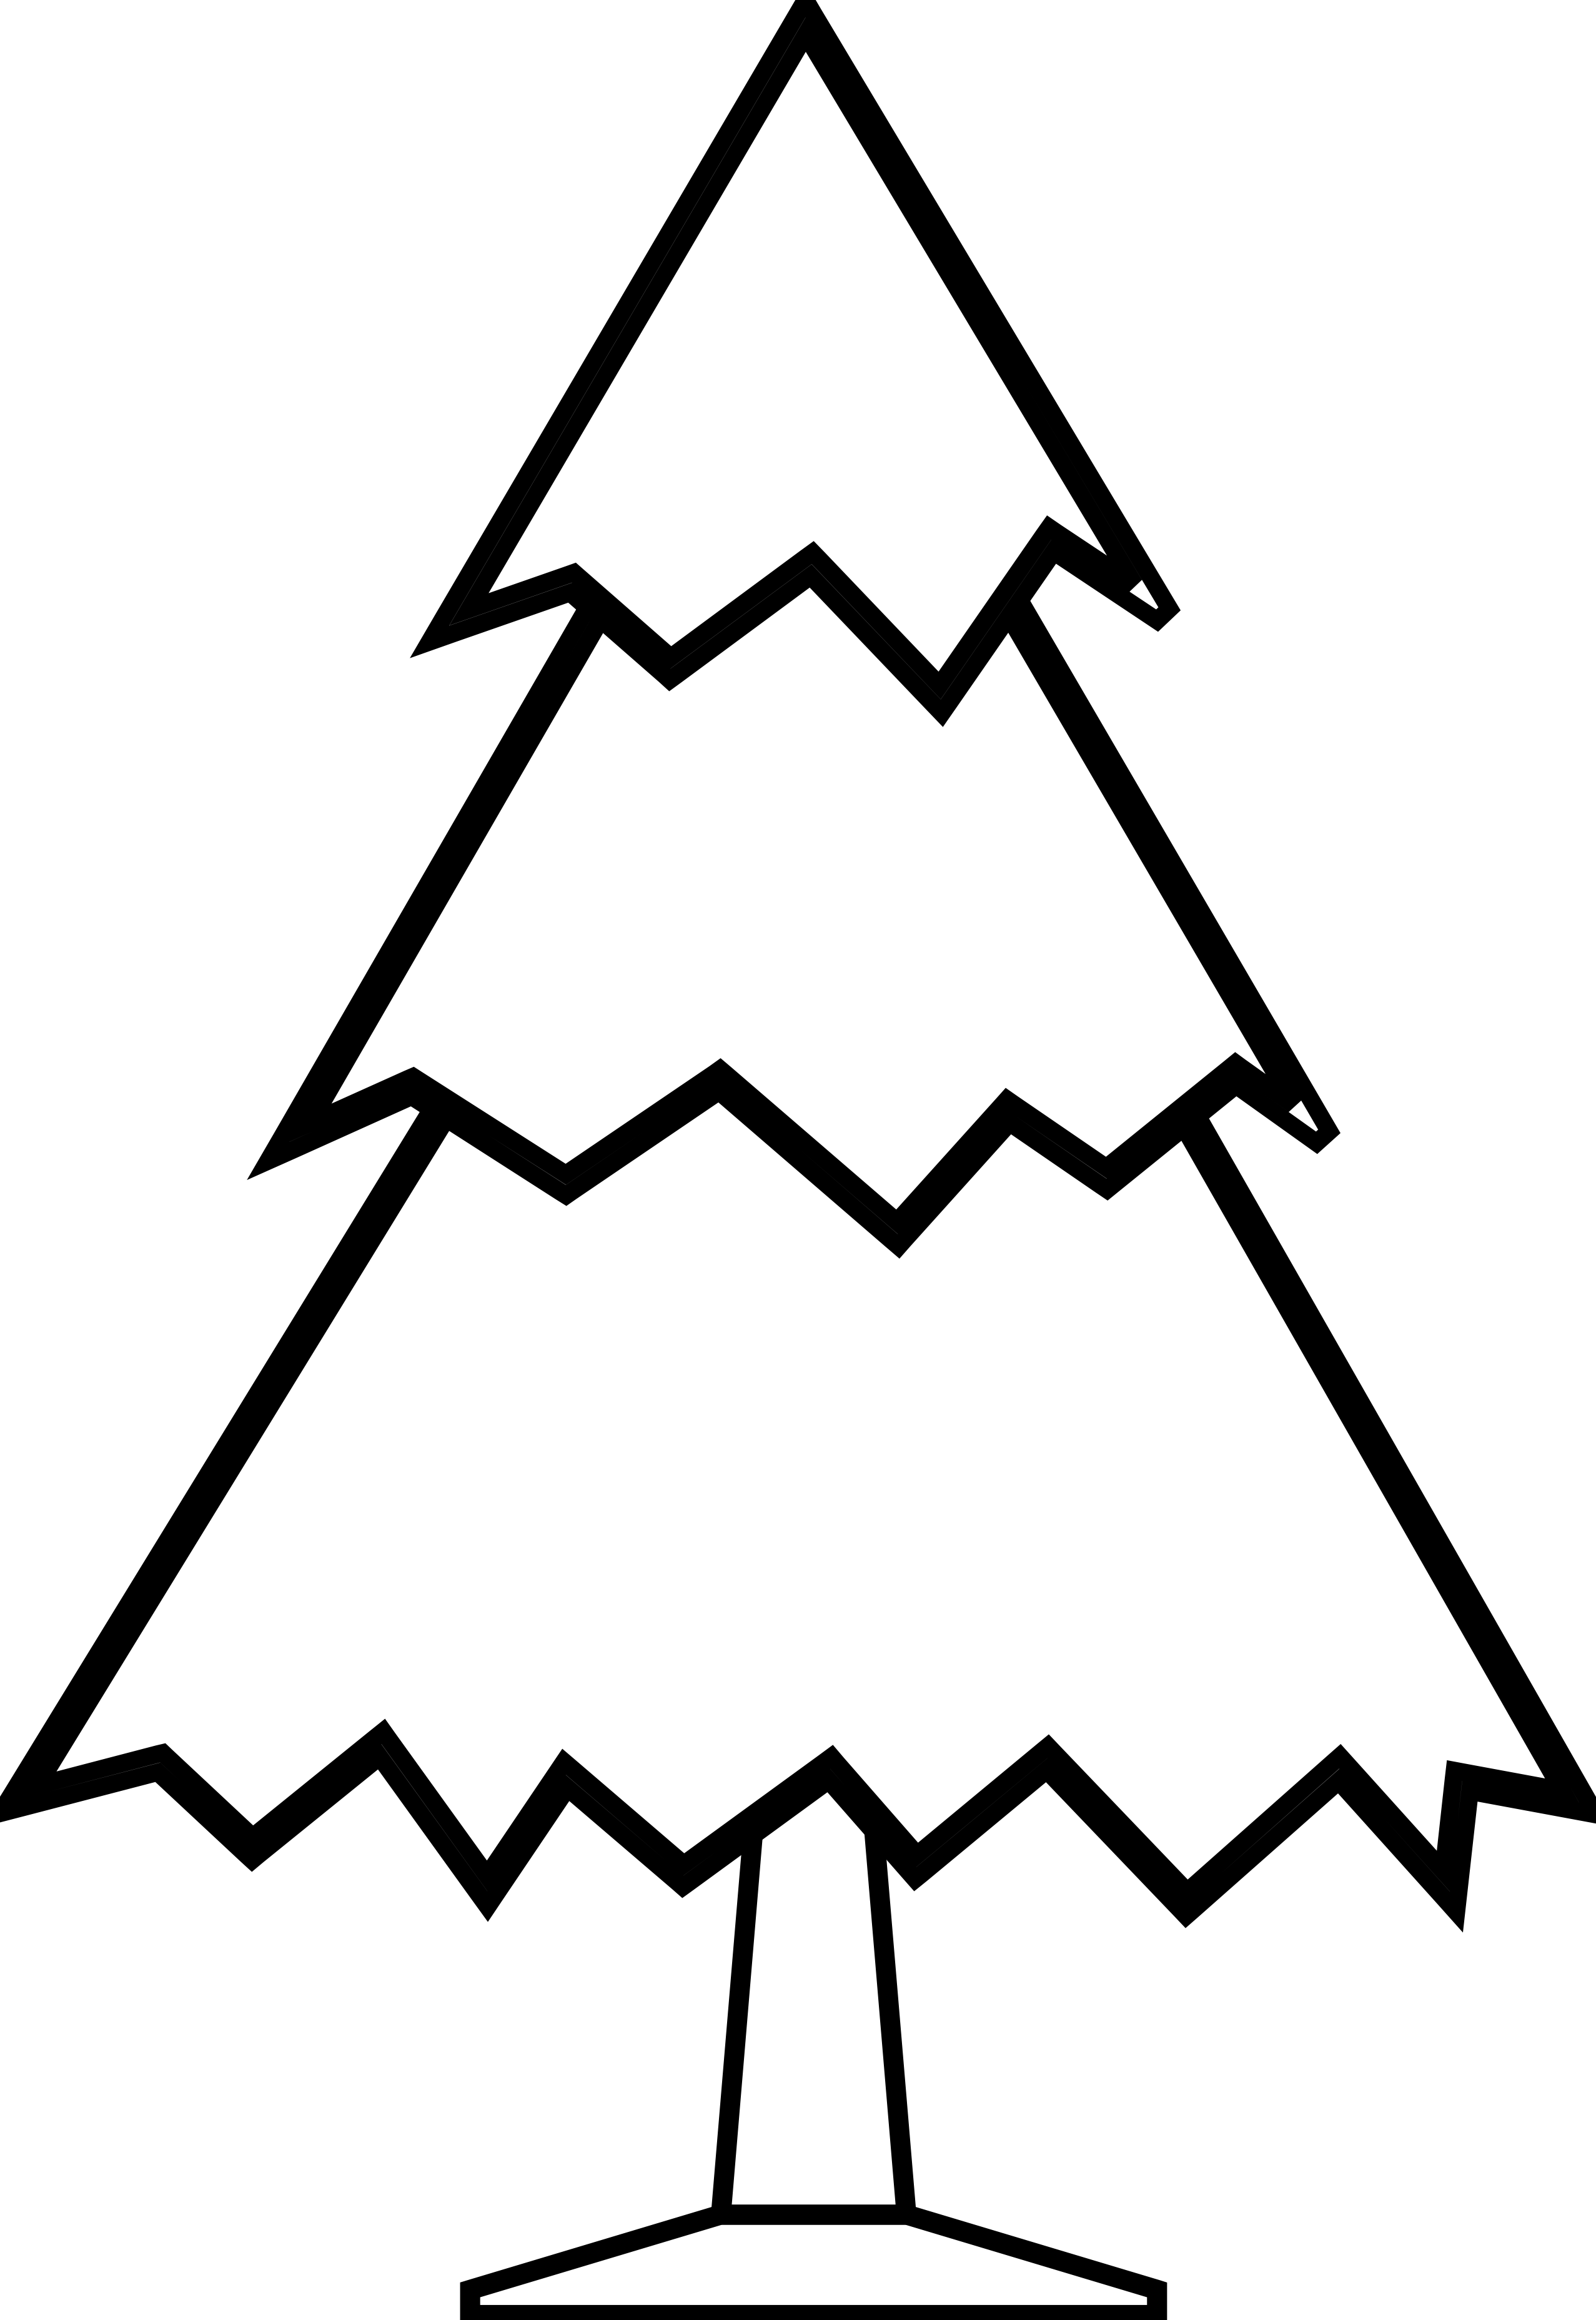 Black And White Tree Drawing | Free Download Clip Art | Free Clip ...